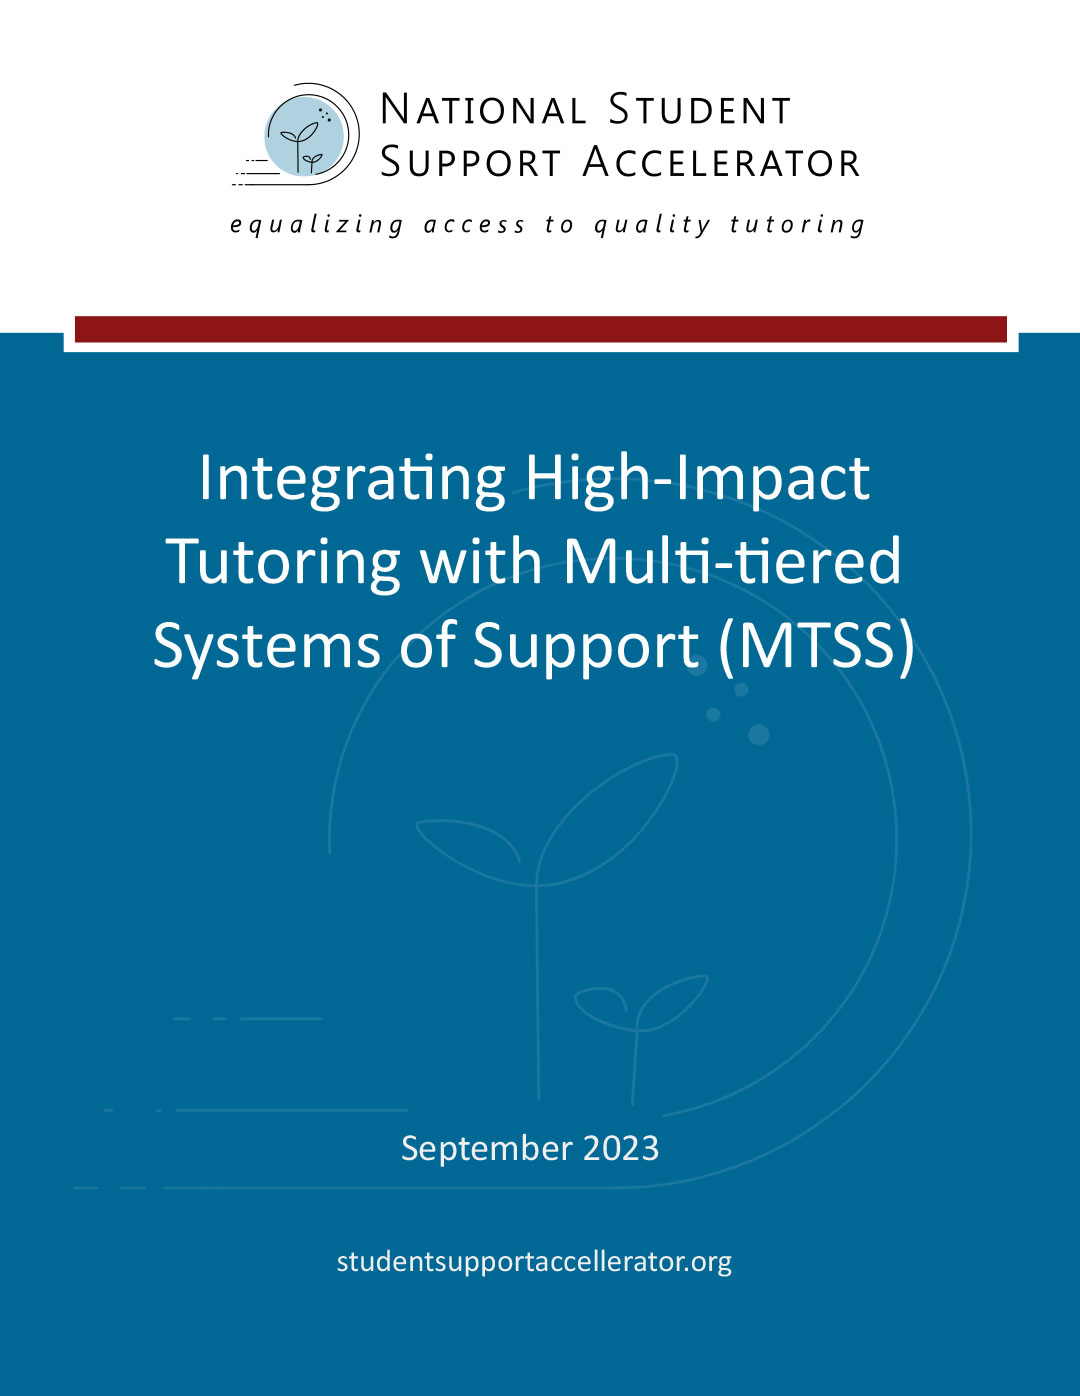 Integrating High-Impact Tutoring with Multi-tiered Systems of Support (MTSS)